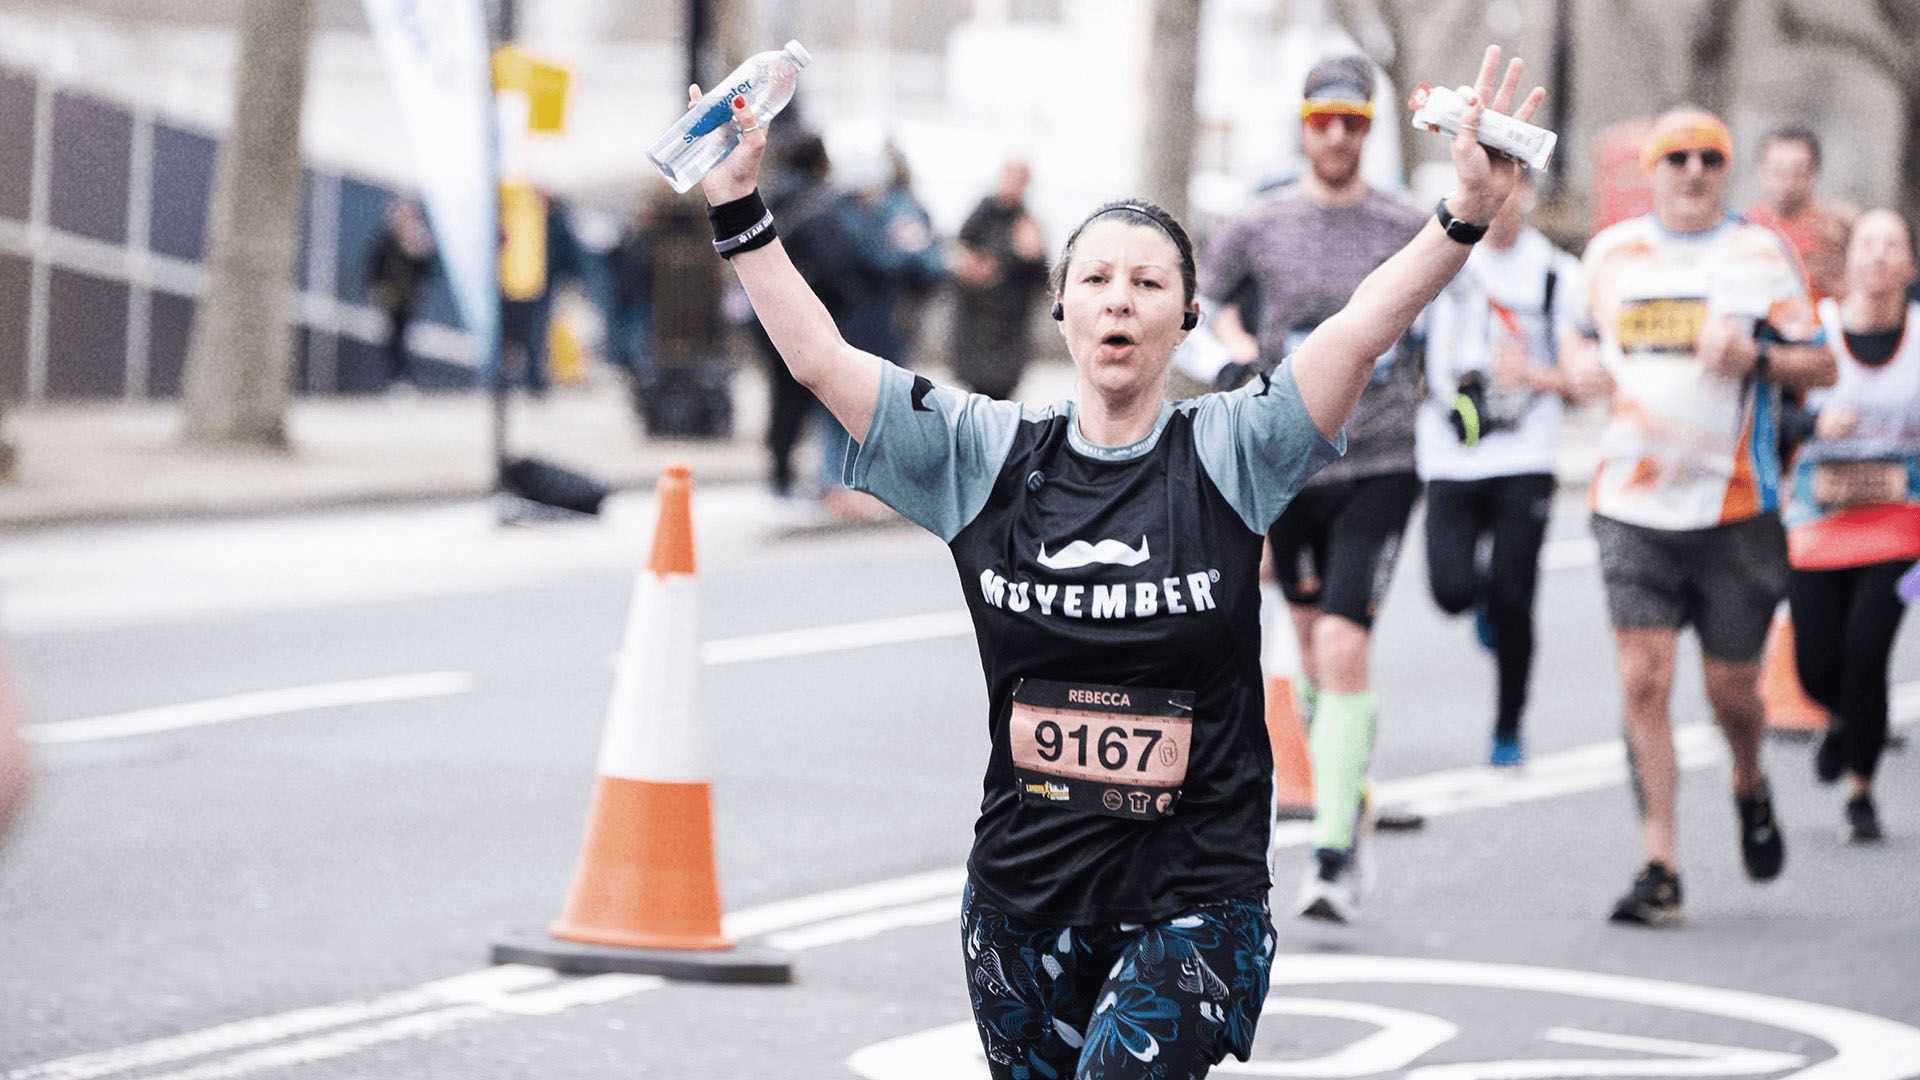 Photo of marathon runner in Movember-branded running gear, triumphantly lifting her arms to camera.